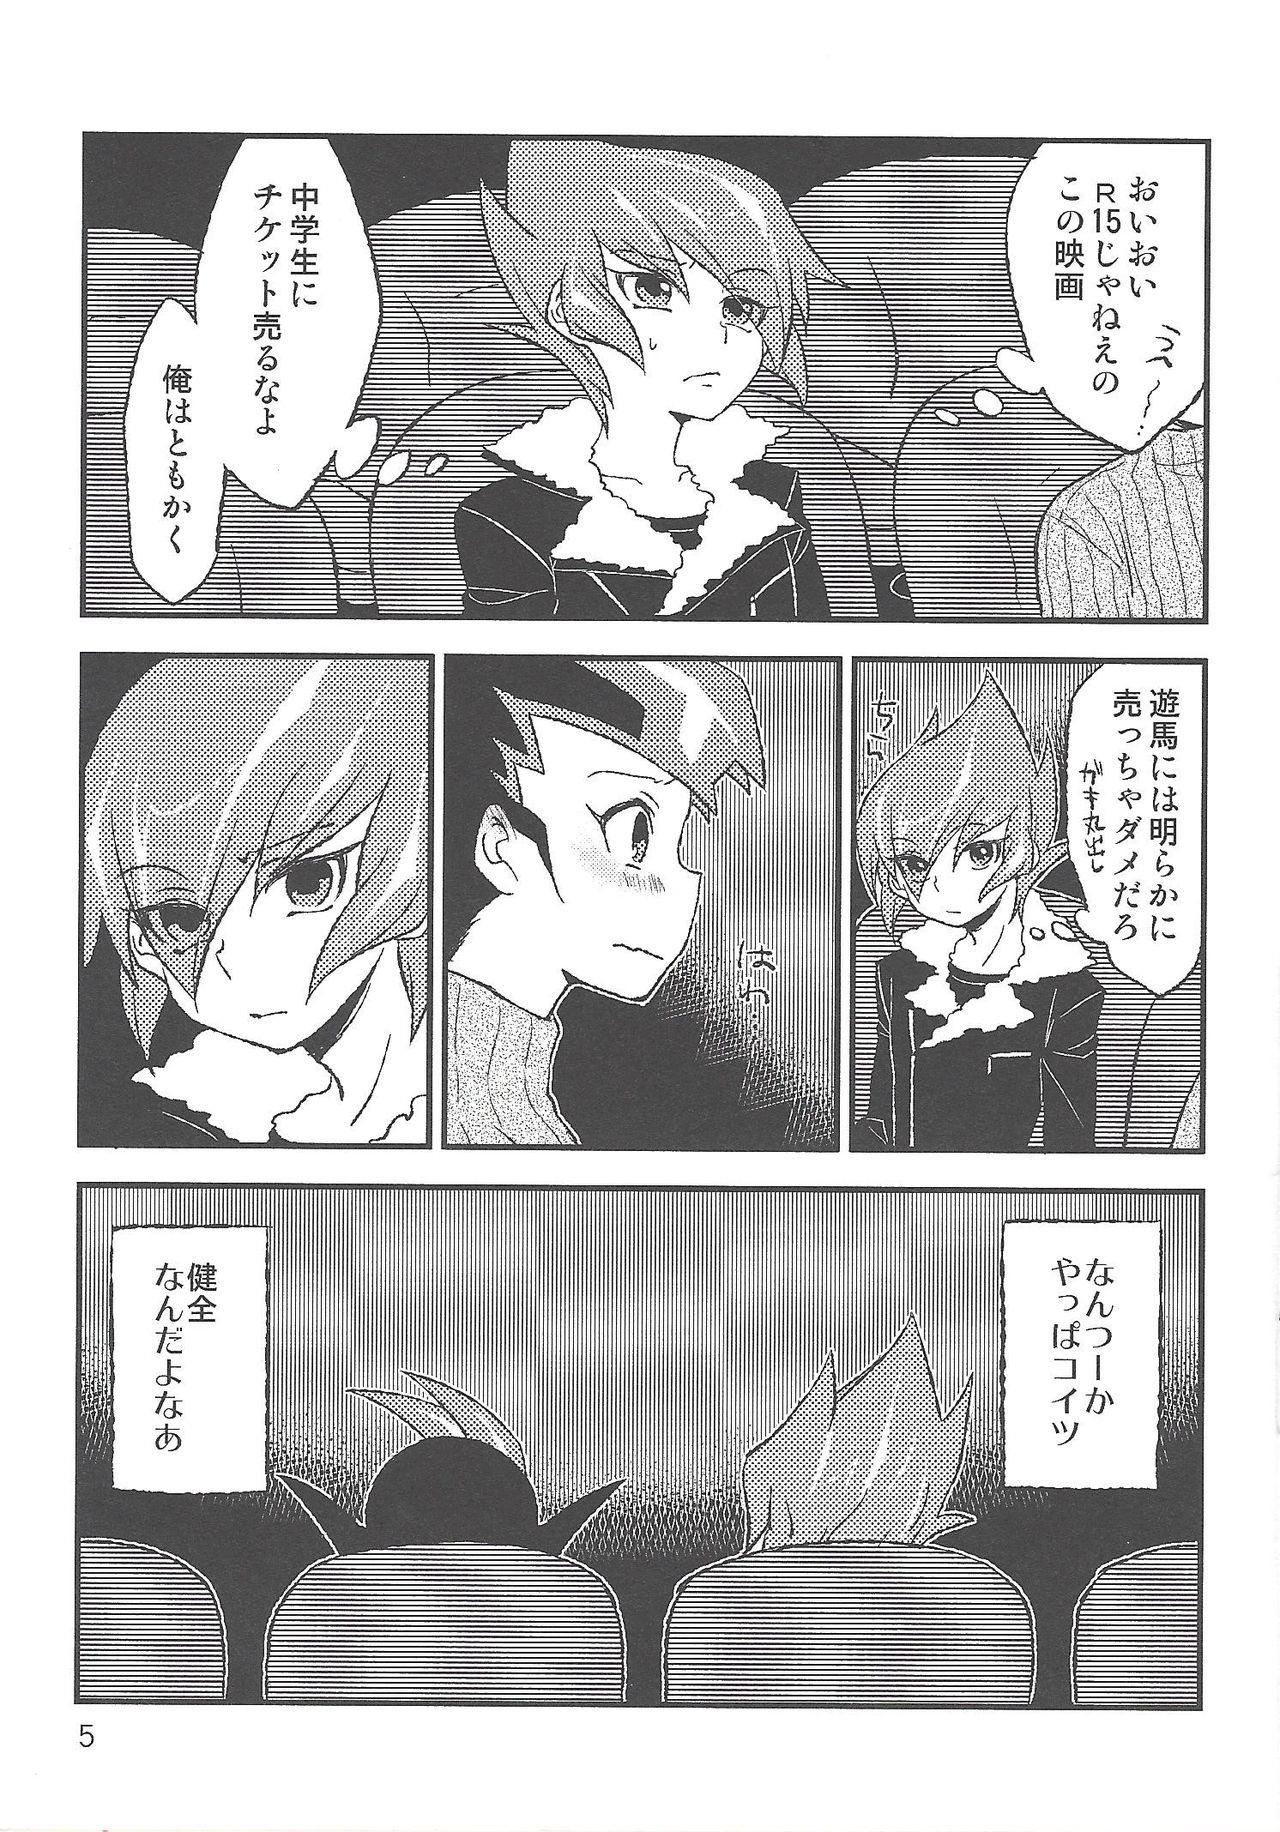 Two INSTANT ROOM - Yu gi oh zexal Foot - Page 6